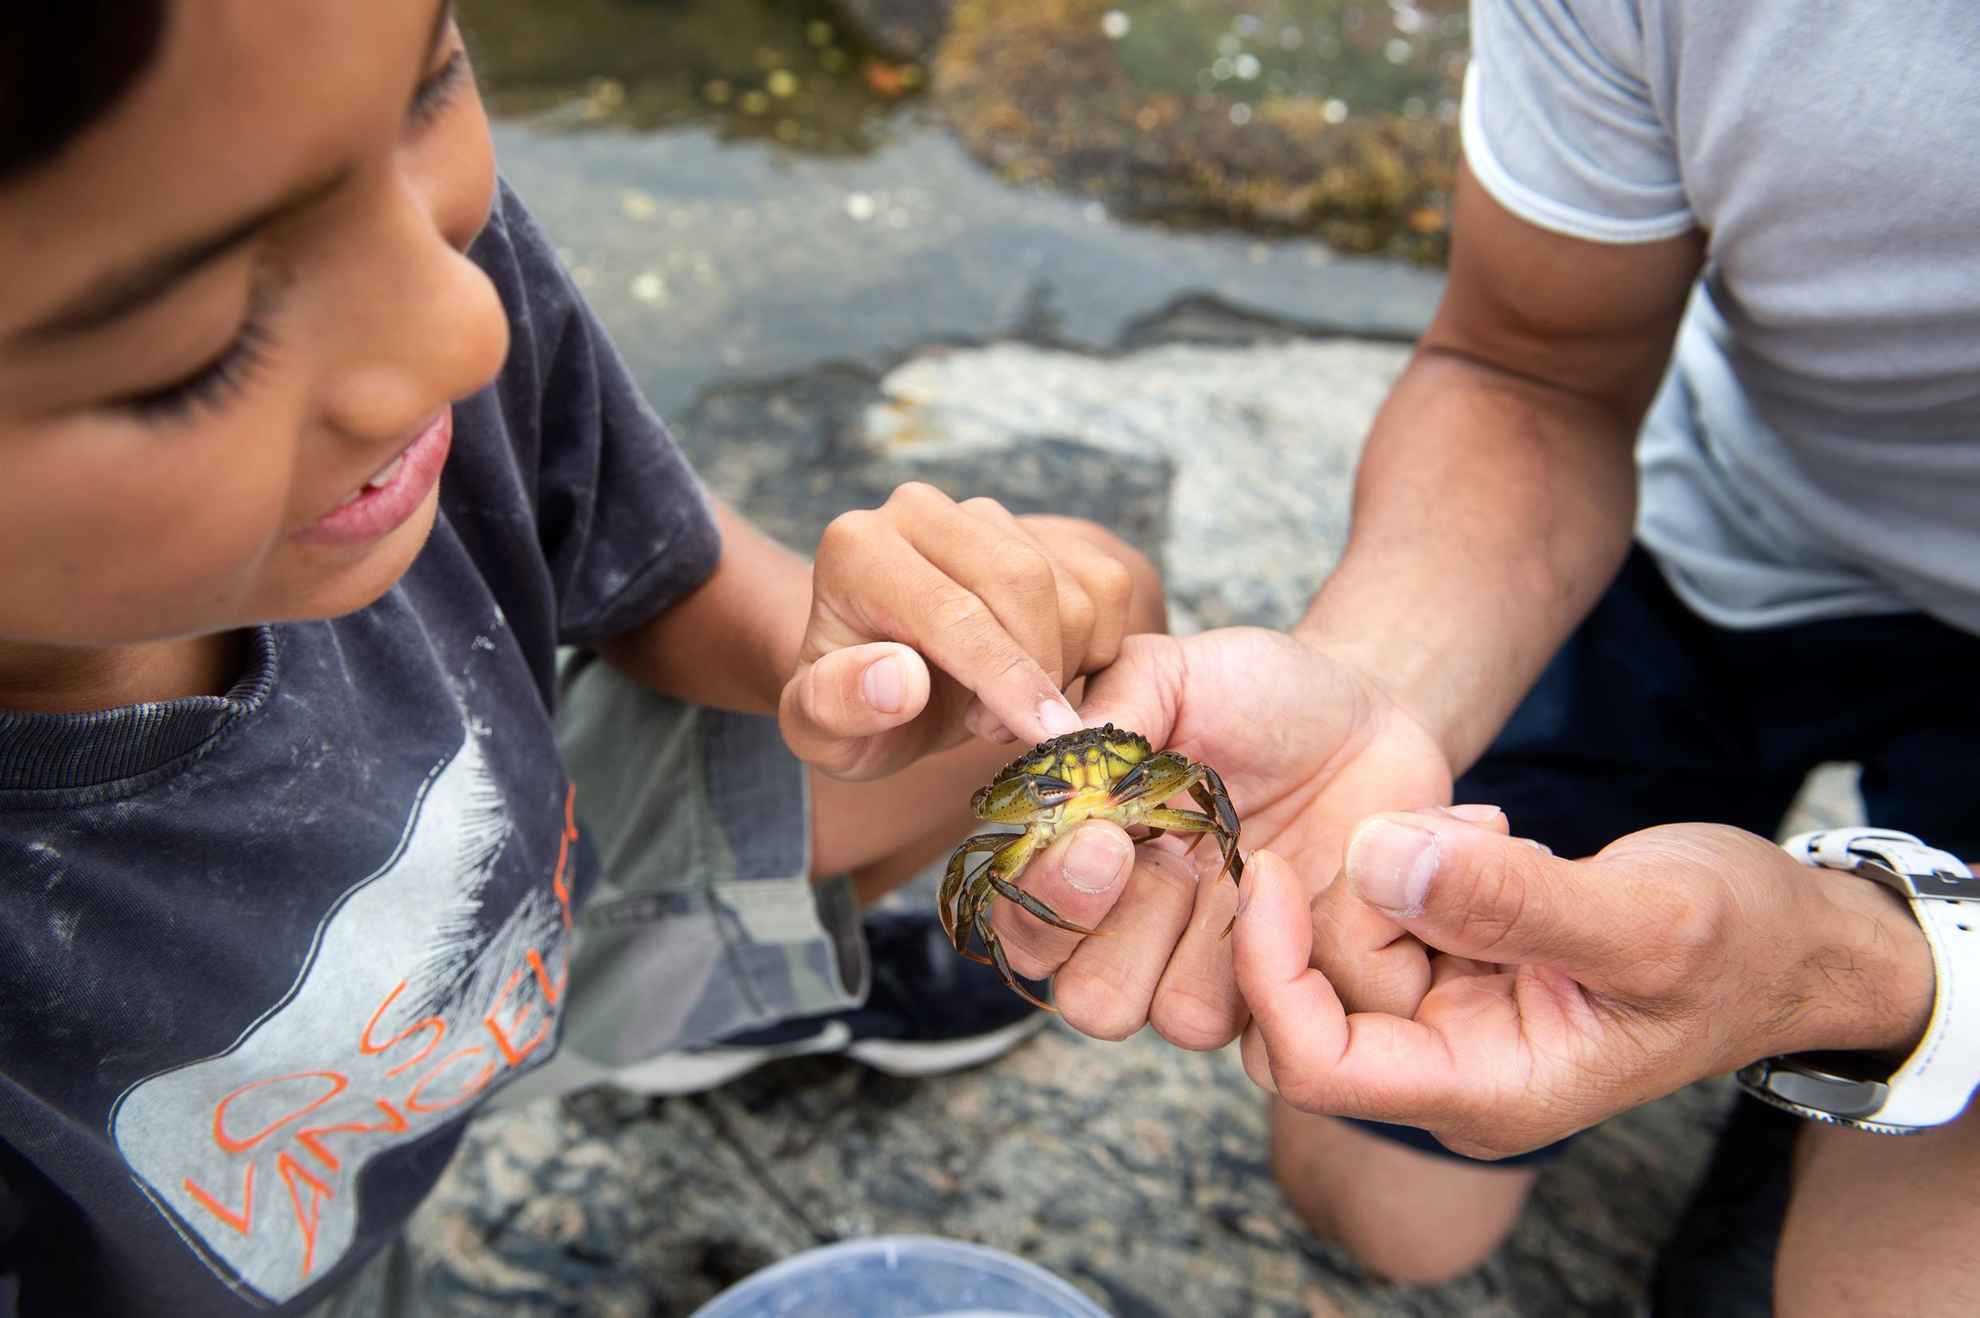 A man holding a crab while a boy is petting it.